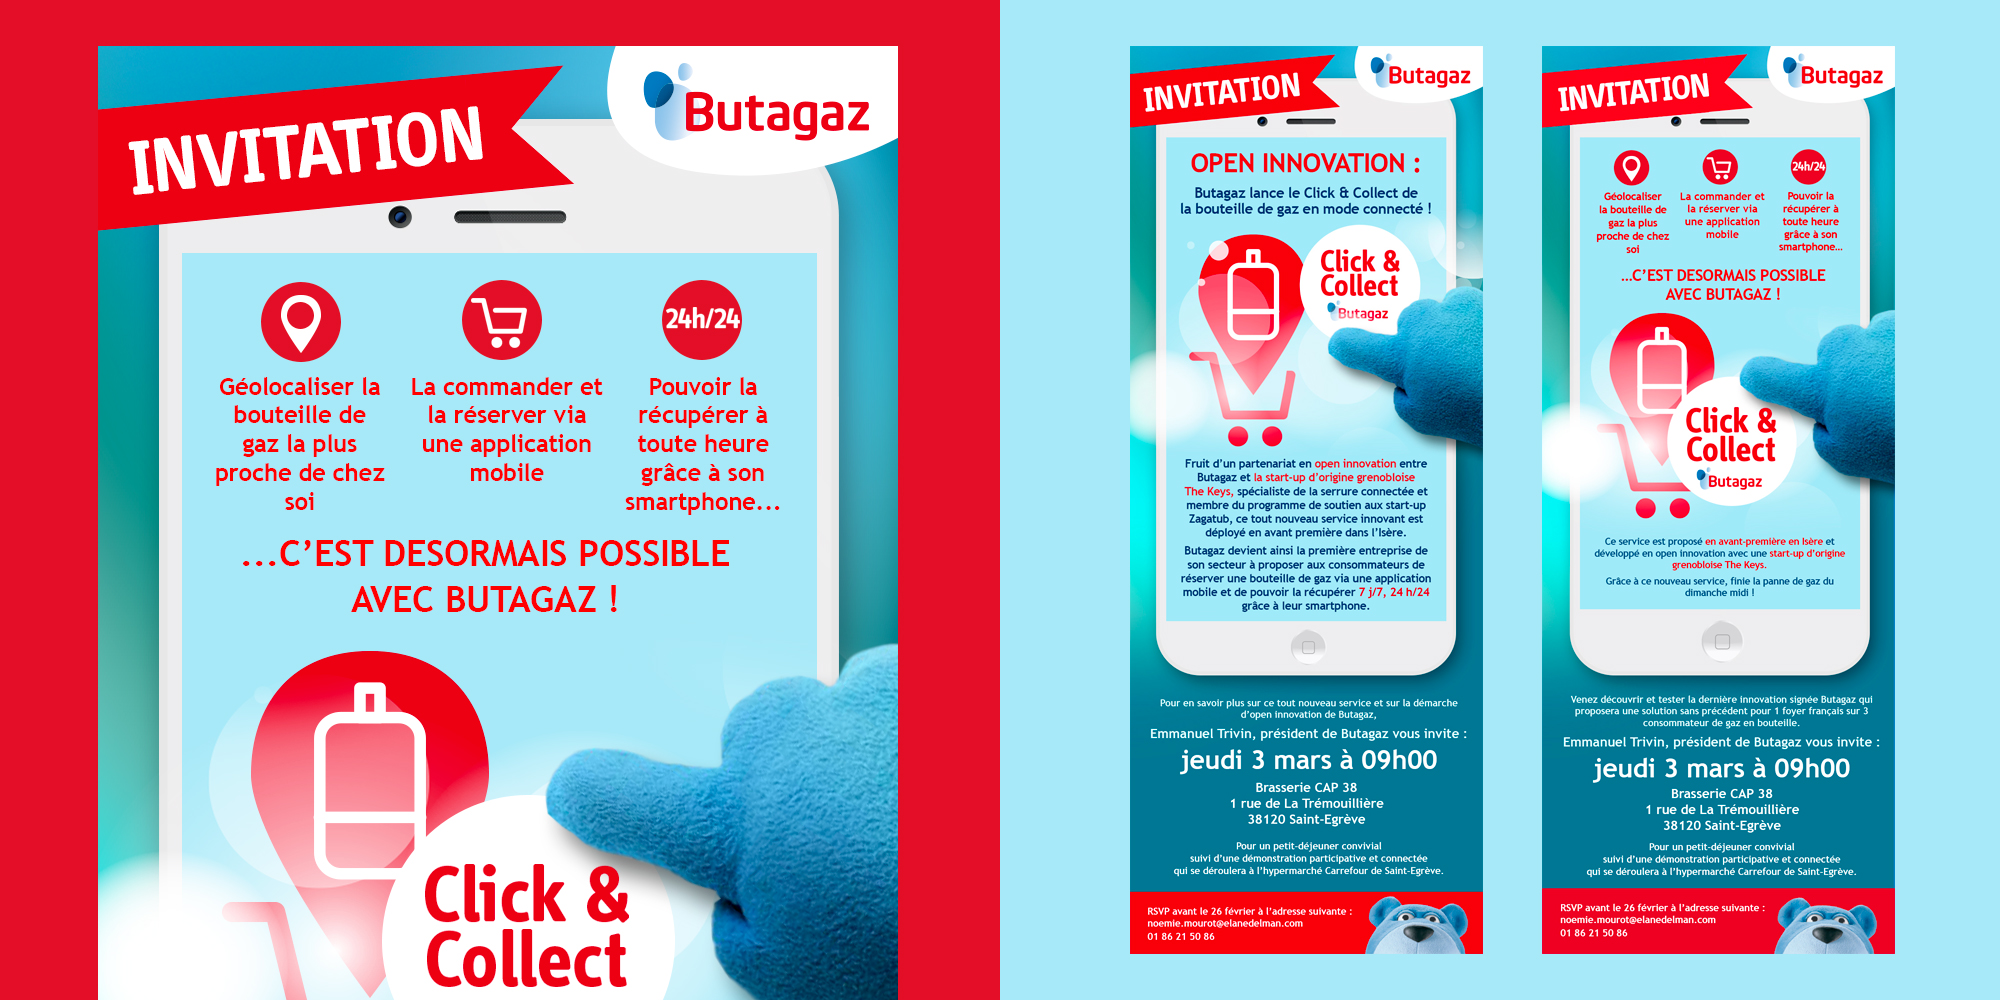 Butagaz - Click & Collect - emailing - IDDP